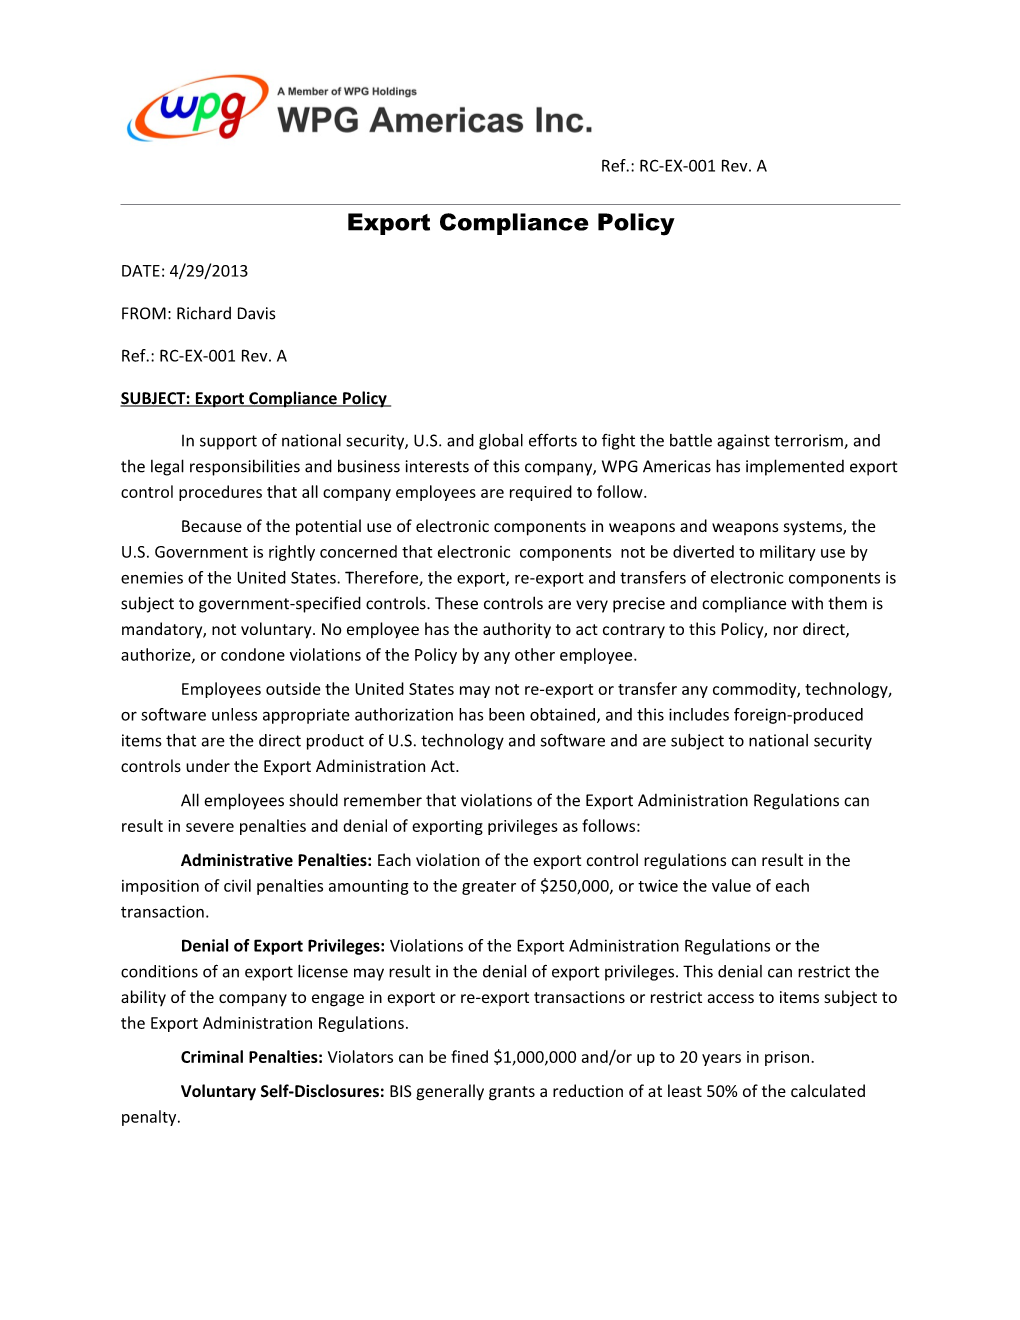 SUBJECT: Export Compliance Policy